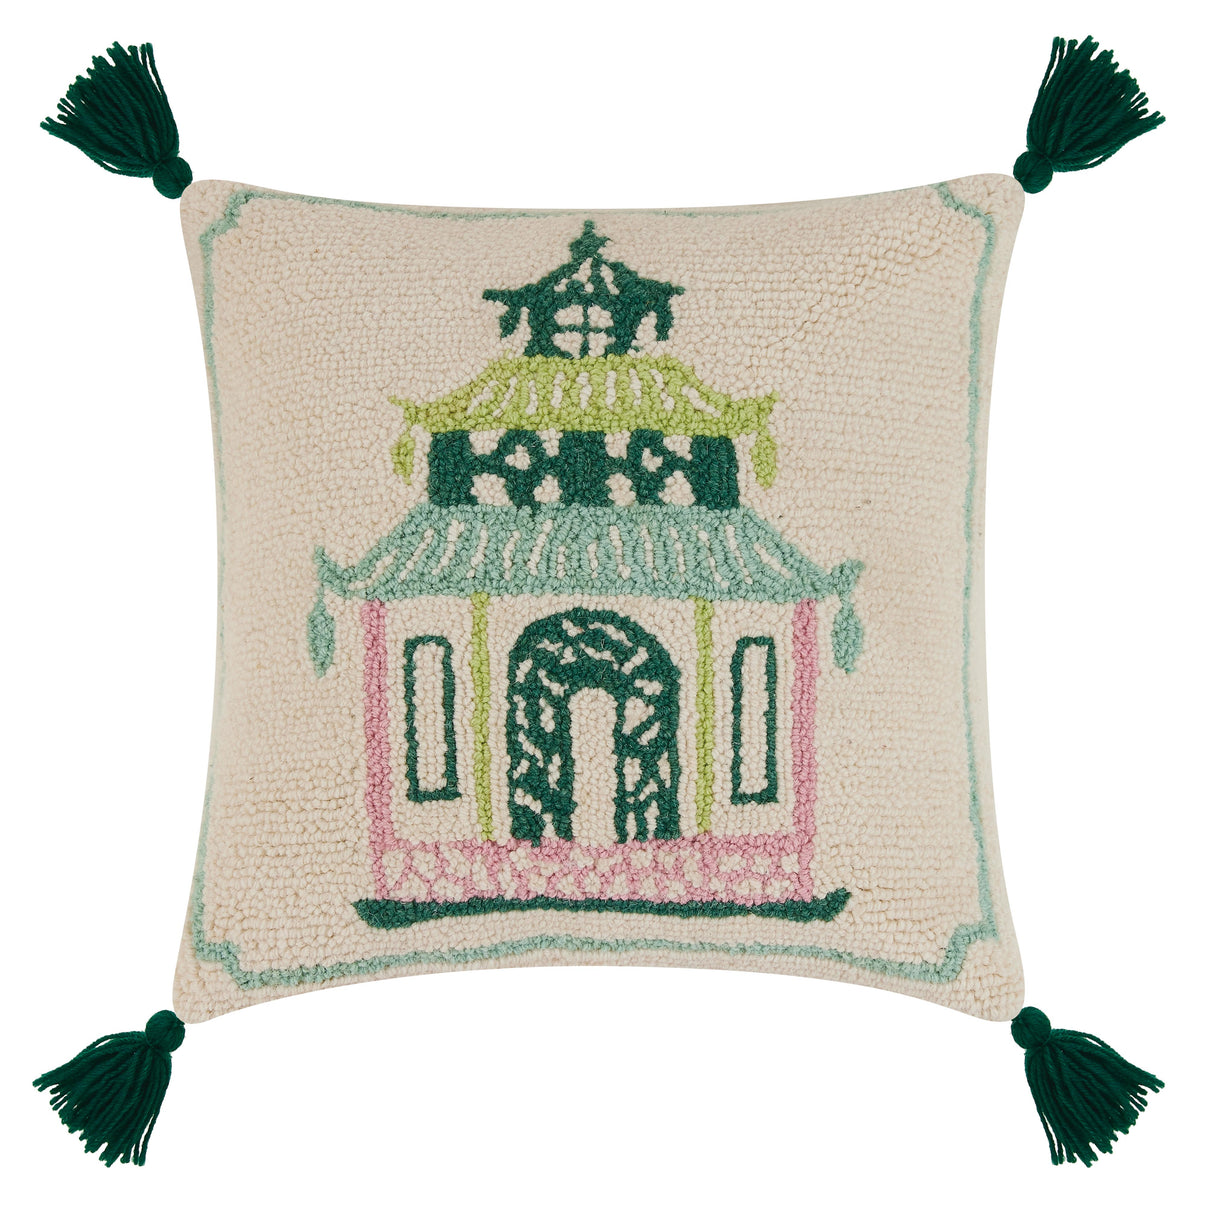 Oh, Pagoda Hooked Wool 18" Square Throw Pillow w/Green Tassels